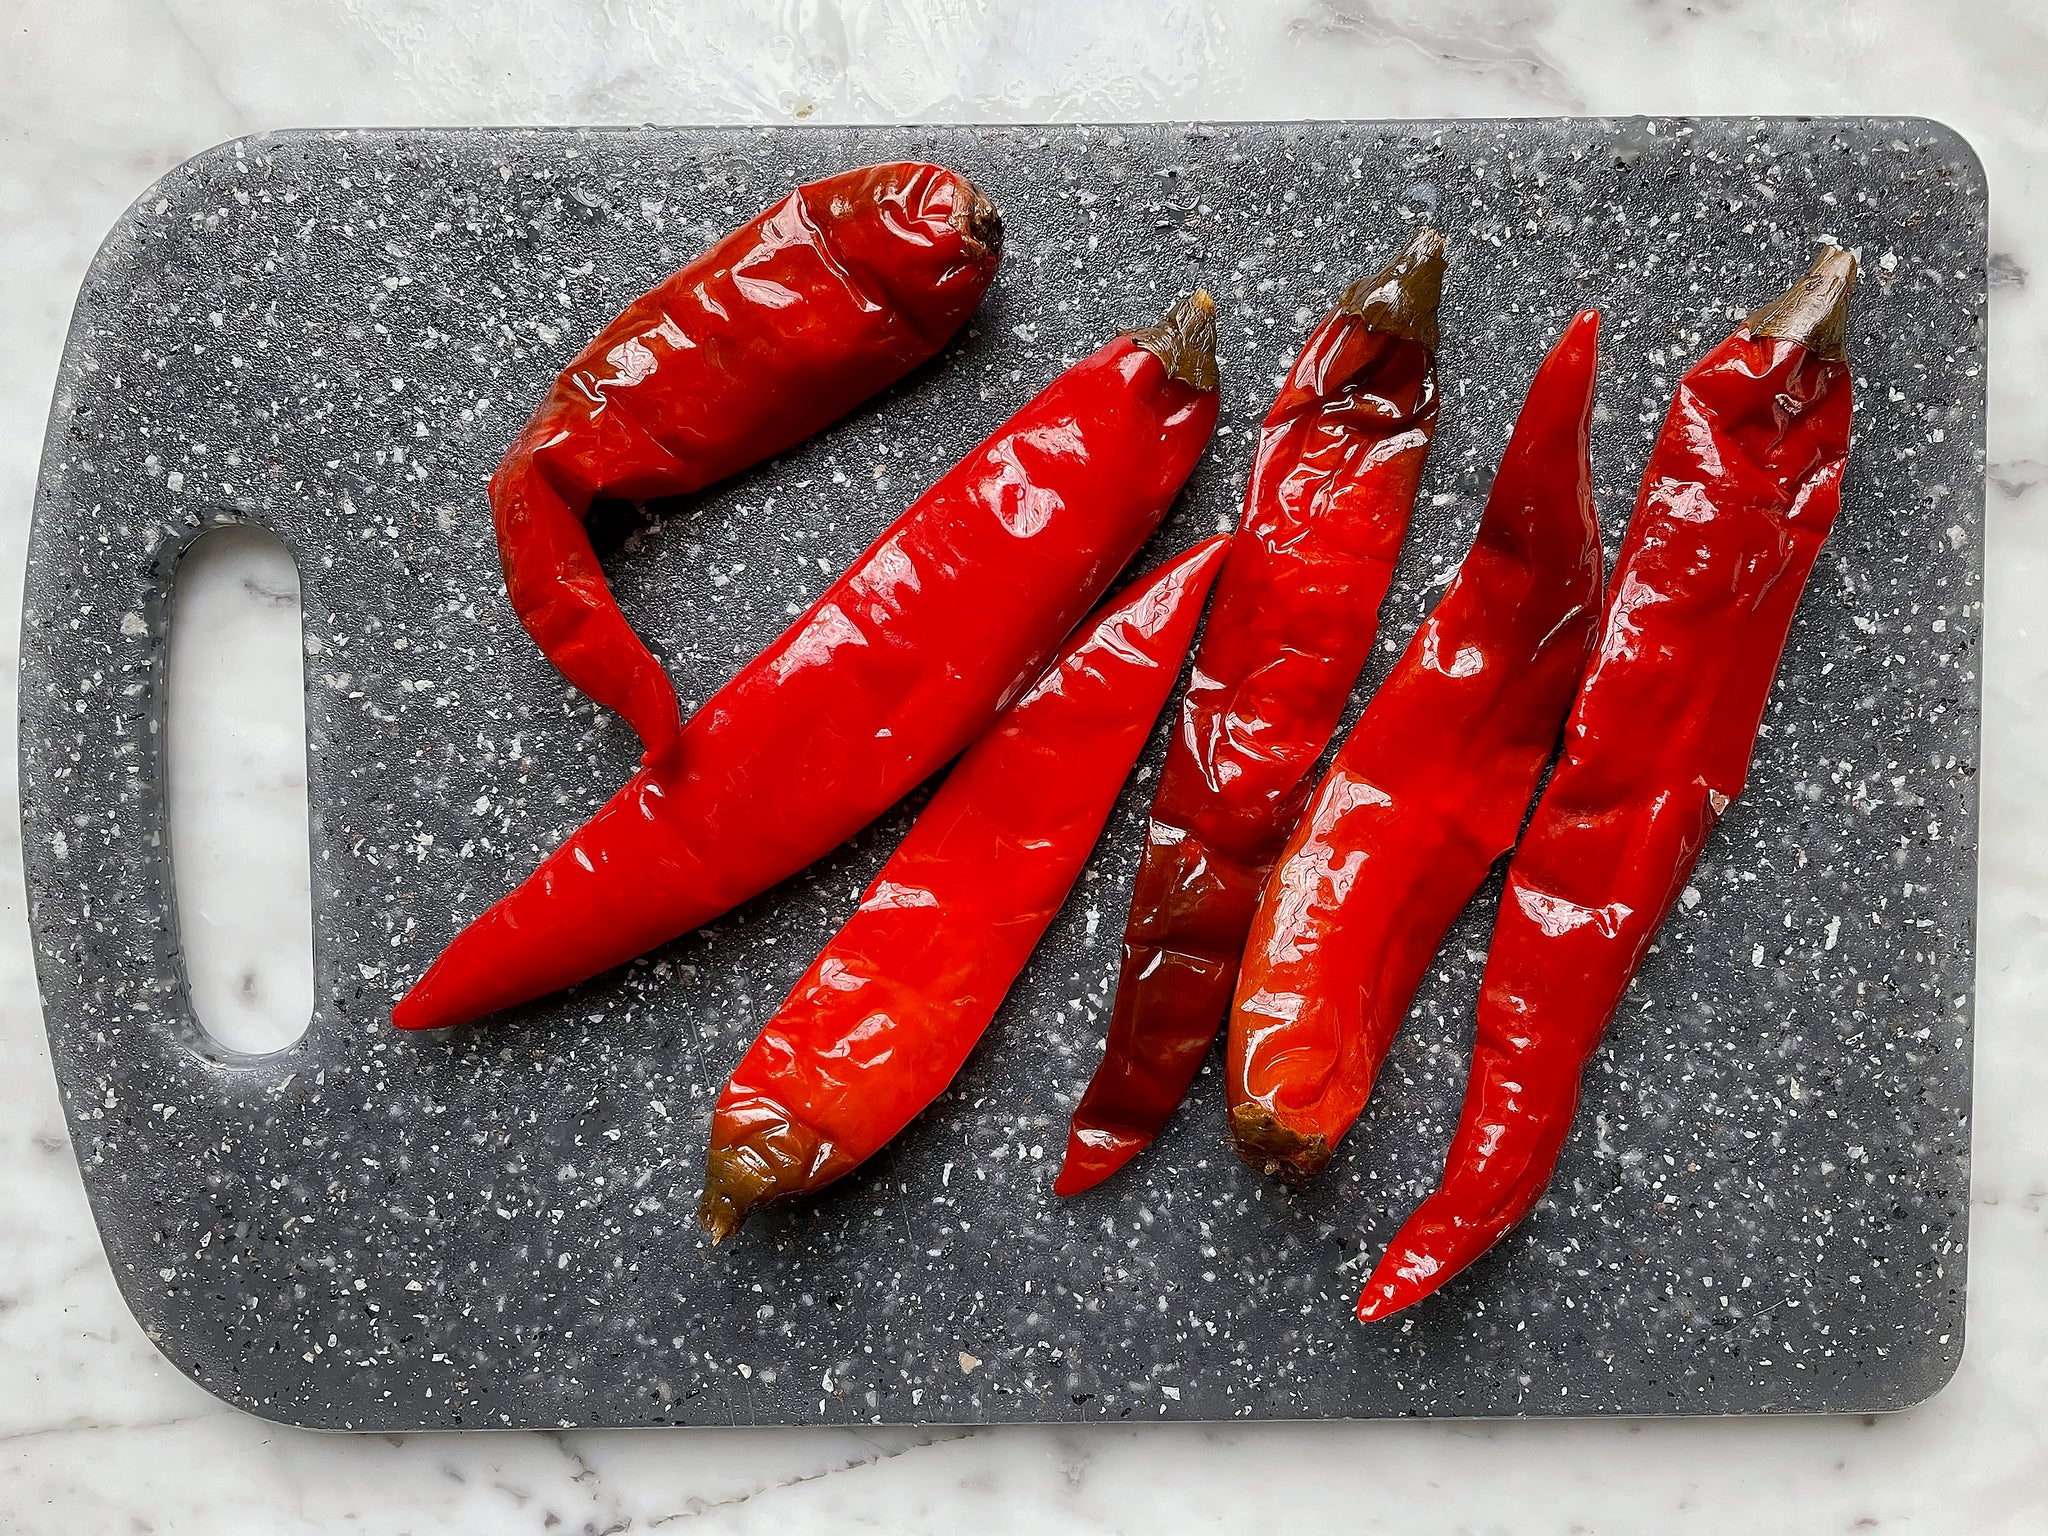 Sichuan pickled chilies (pao la jiao) on cutting board